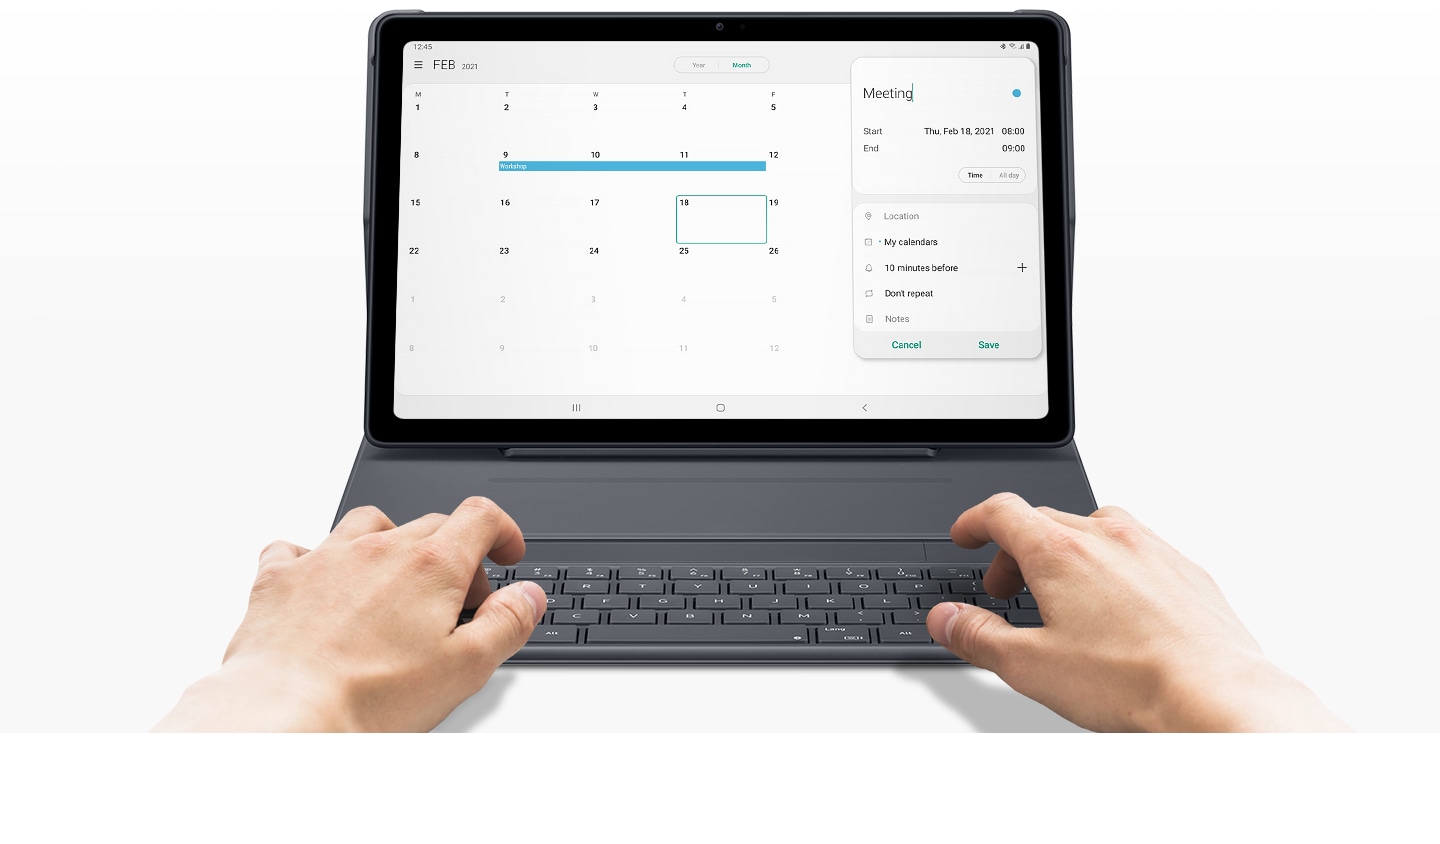 A tablet screen editing a meeting in the calendar and a hand typing on the QWERTY keyboard are shown.